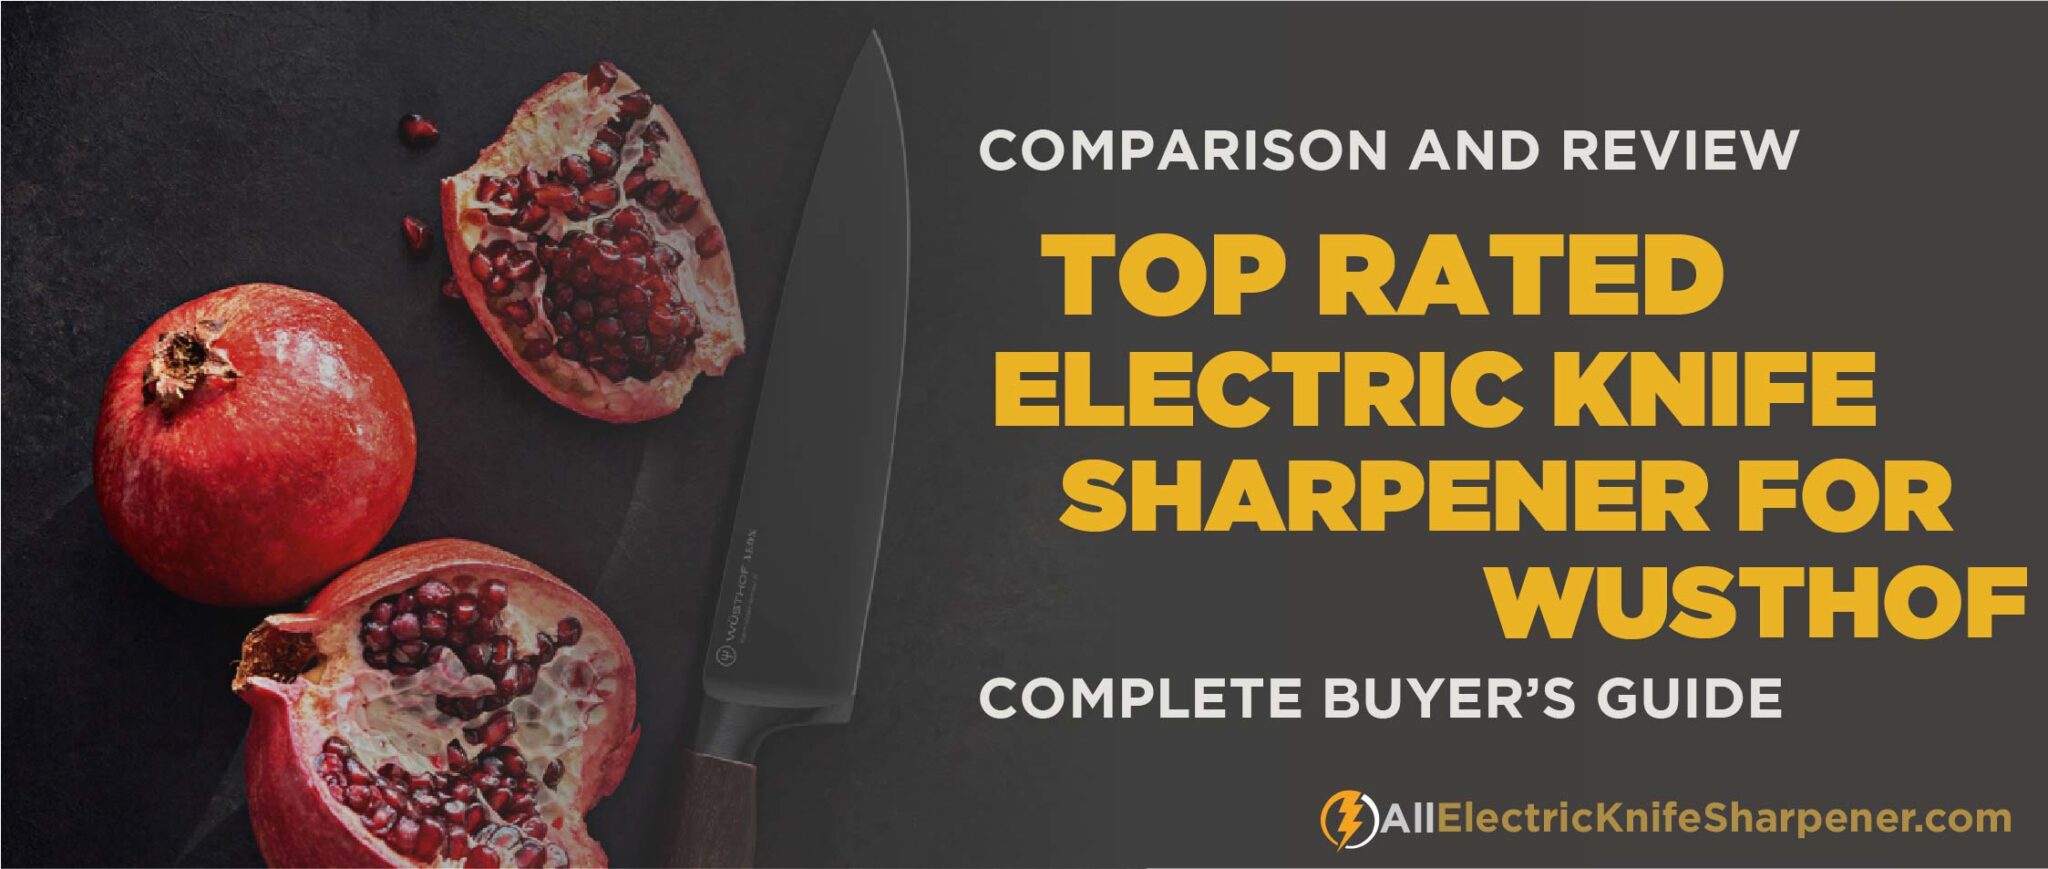 Best electric knife sharpener for wusthof - Detailed Review and Buying Guide